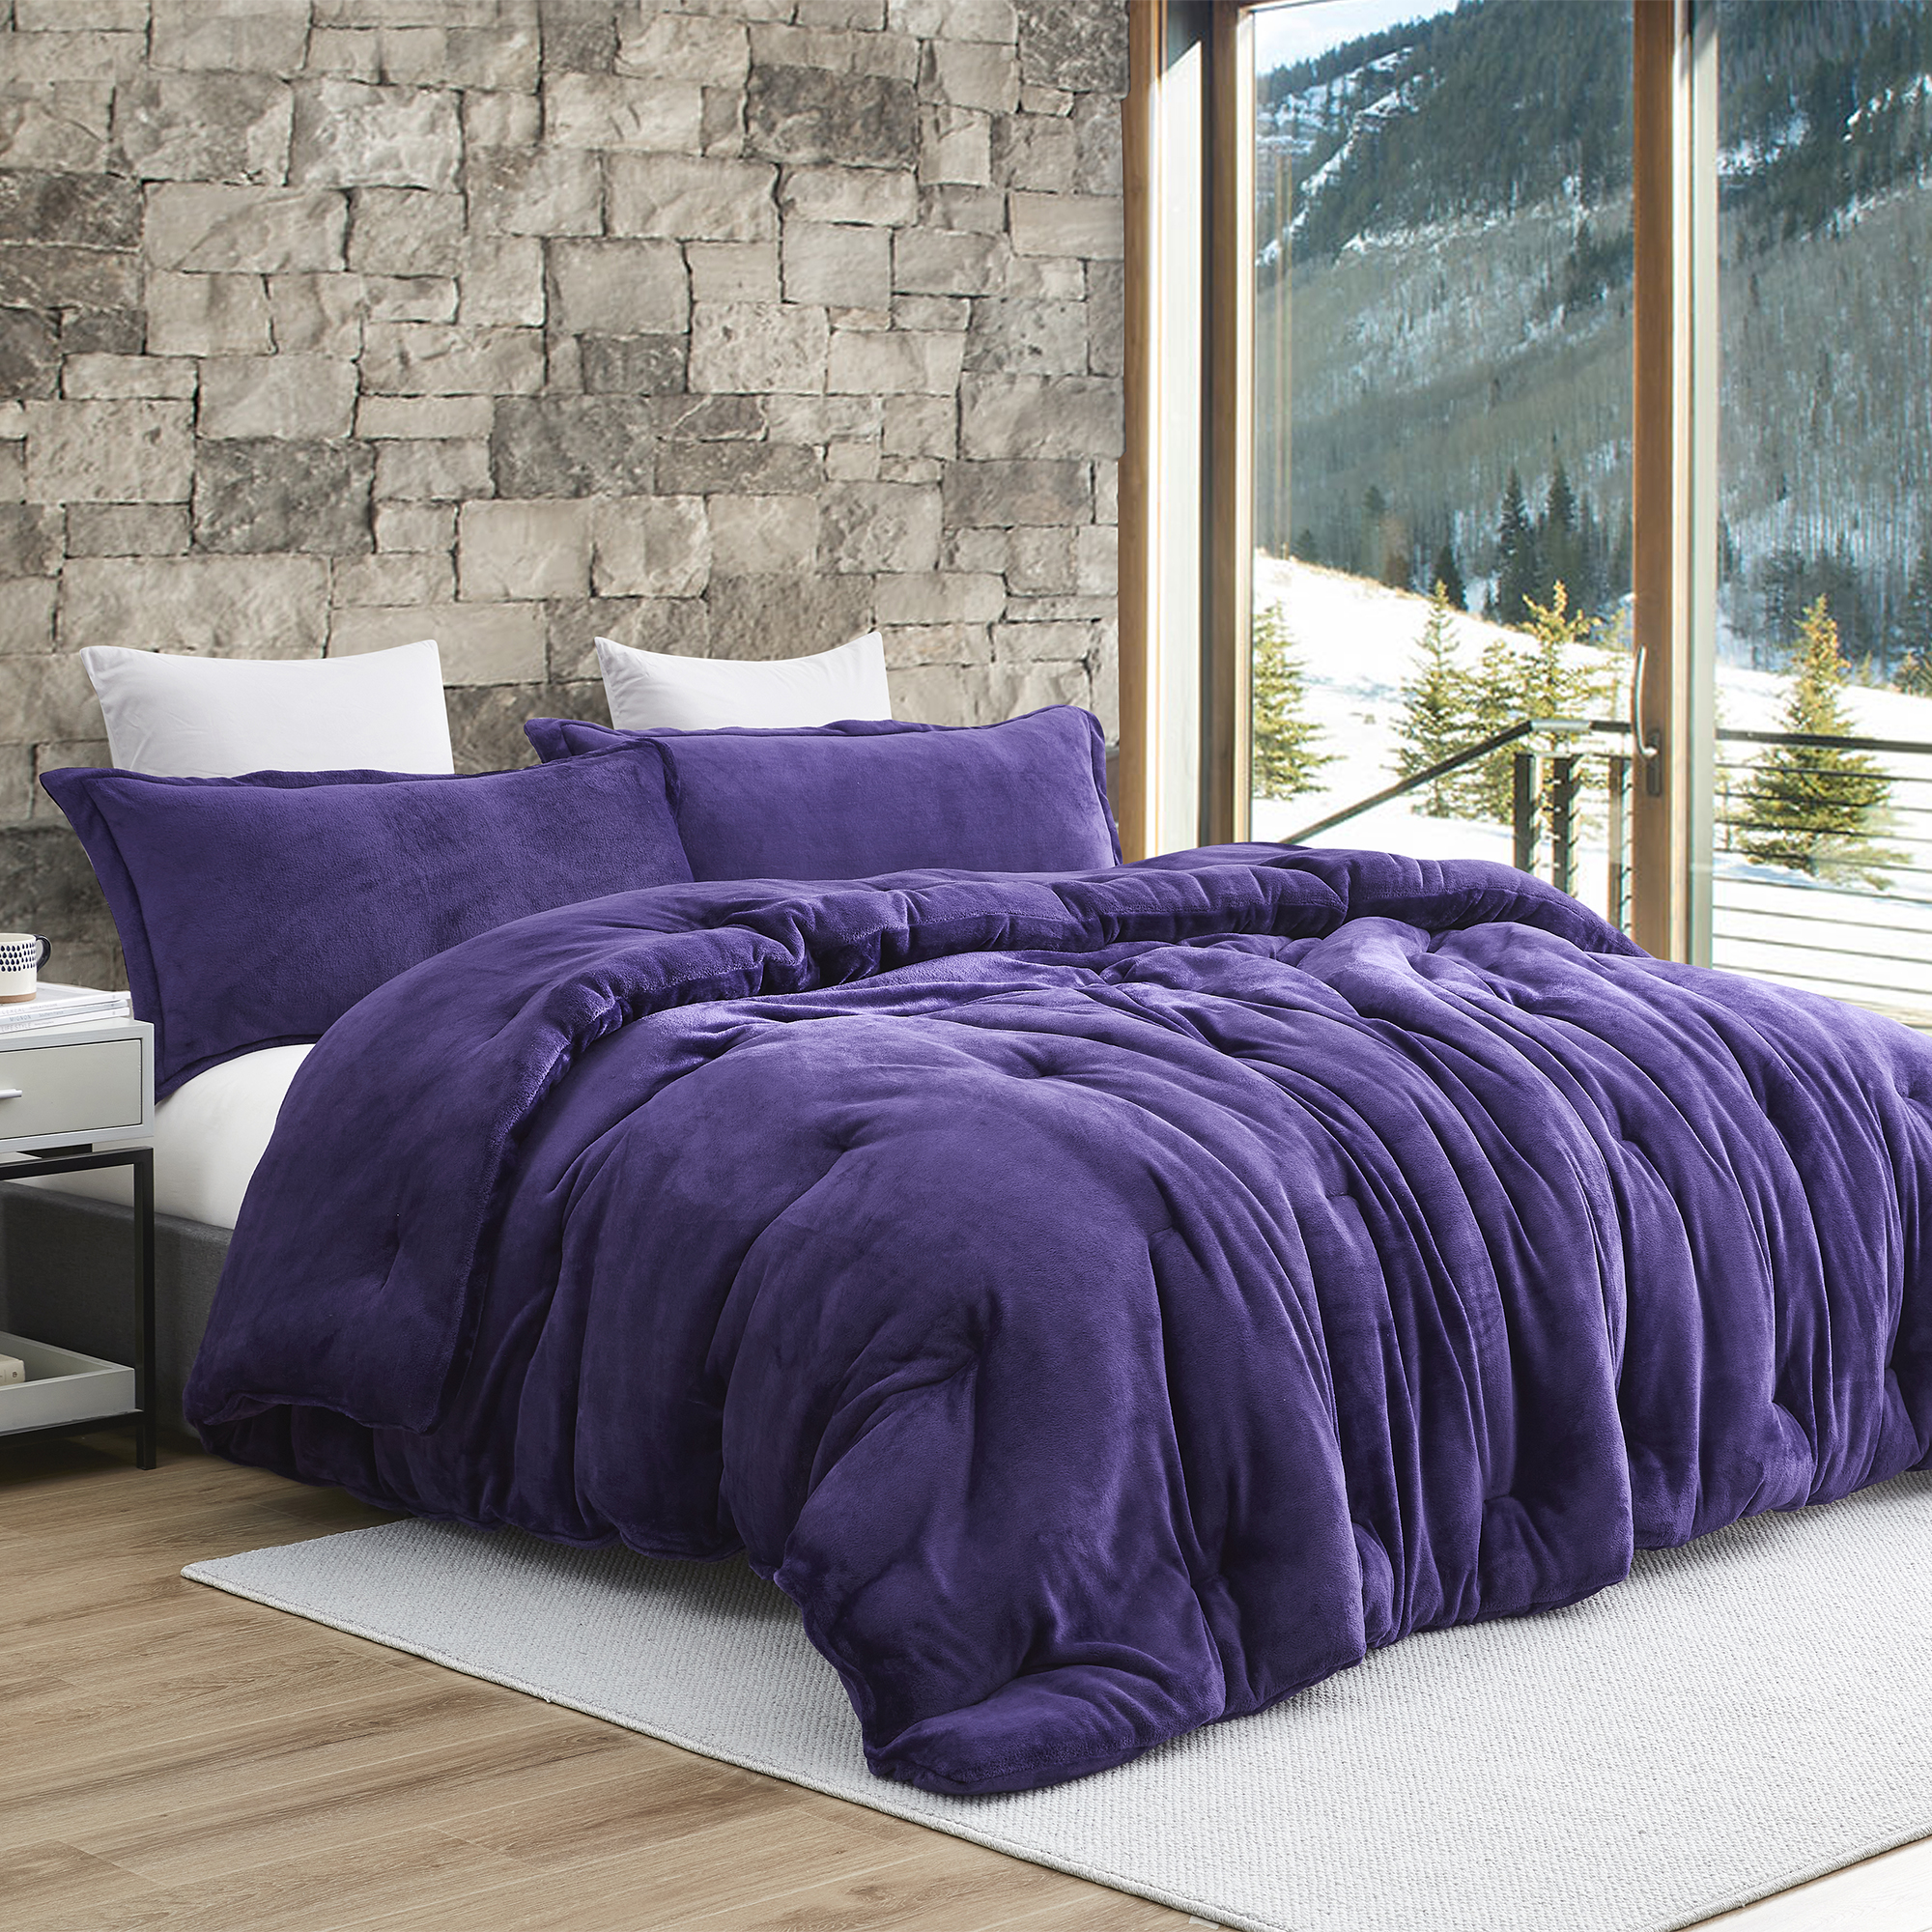 Thicker Than Thick - Coma Inducer® King Comforter - Standard Plush Filling - Parachute Purple